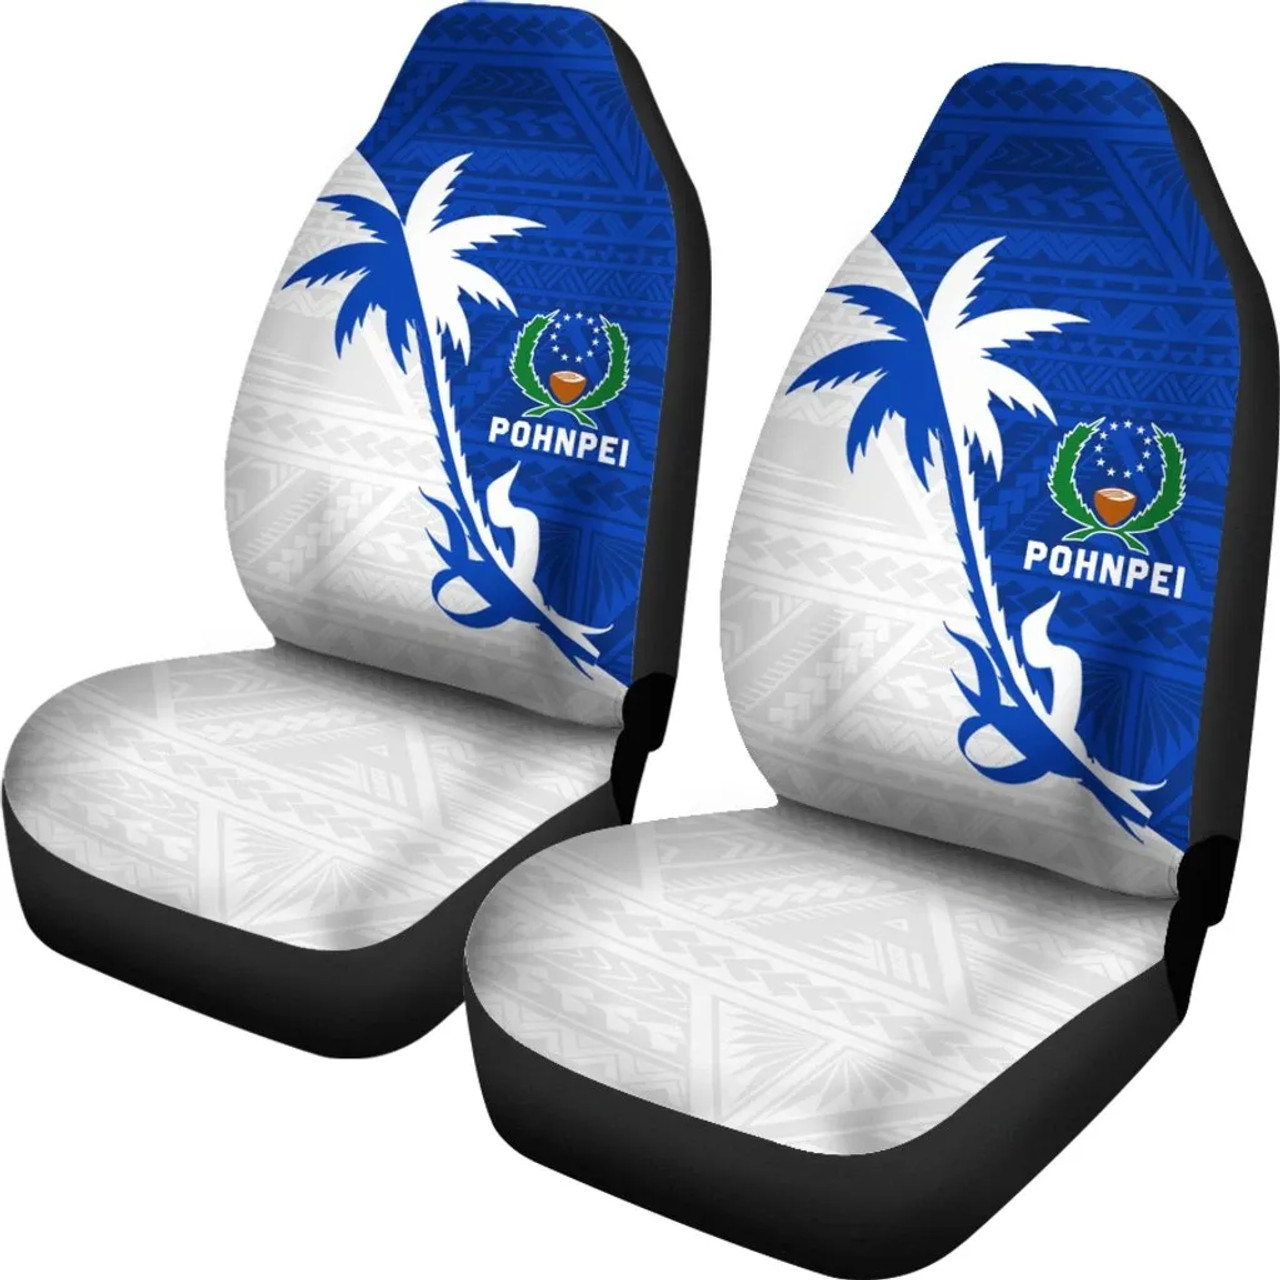 Pohnpei Car Seat Covers - Pohnpei Flag Coconut Tree